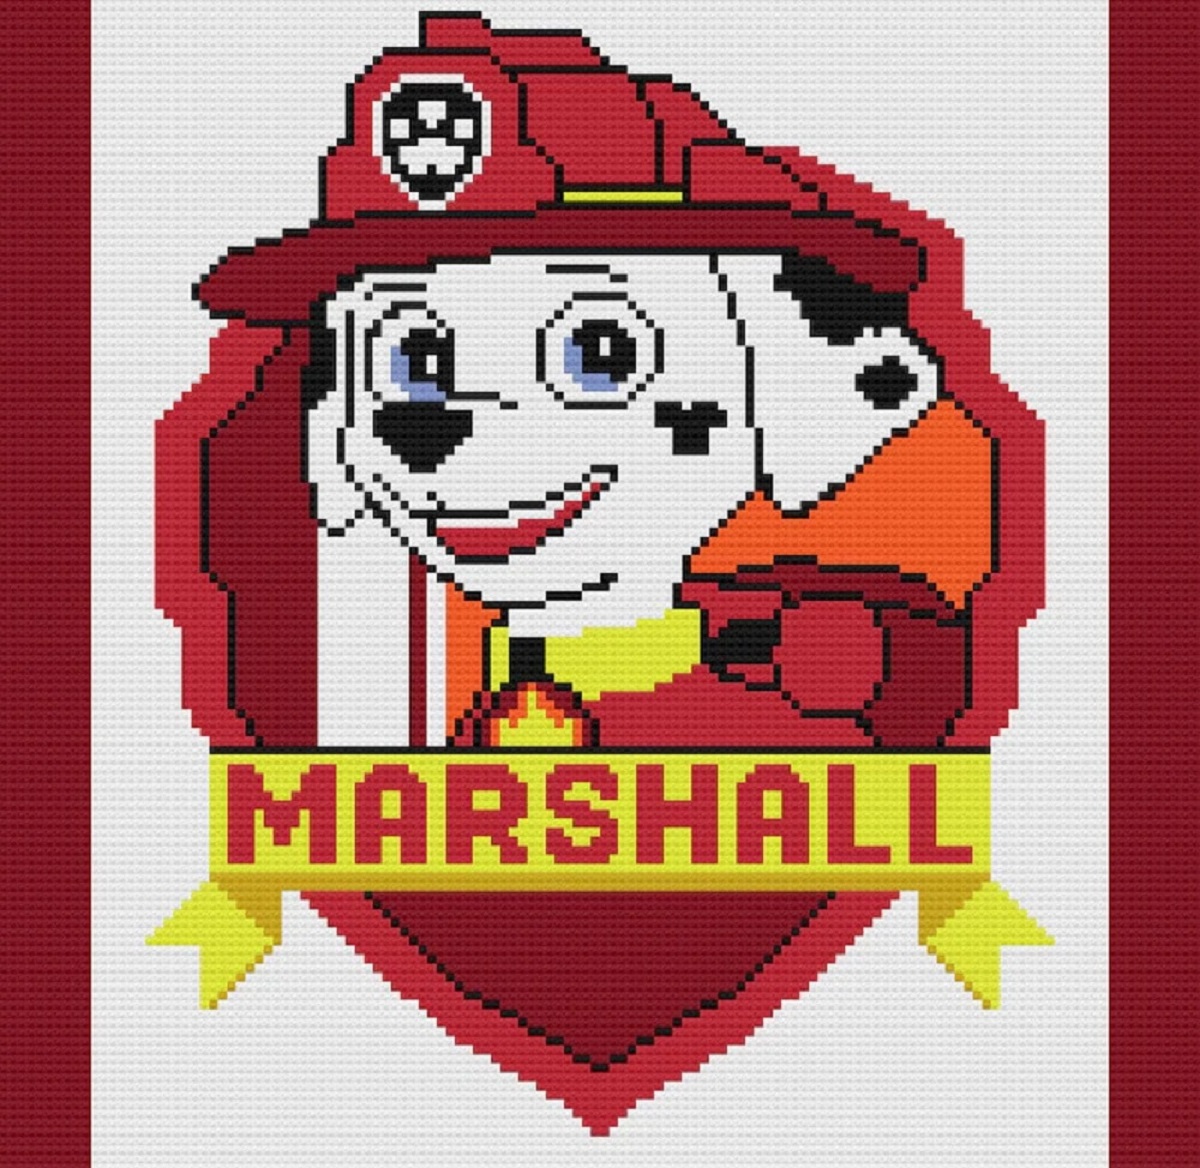 Crochet Paw Patrol blanket with Marshall in the center of a shield with his name printed underneath in red lettering.